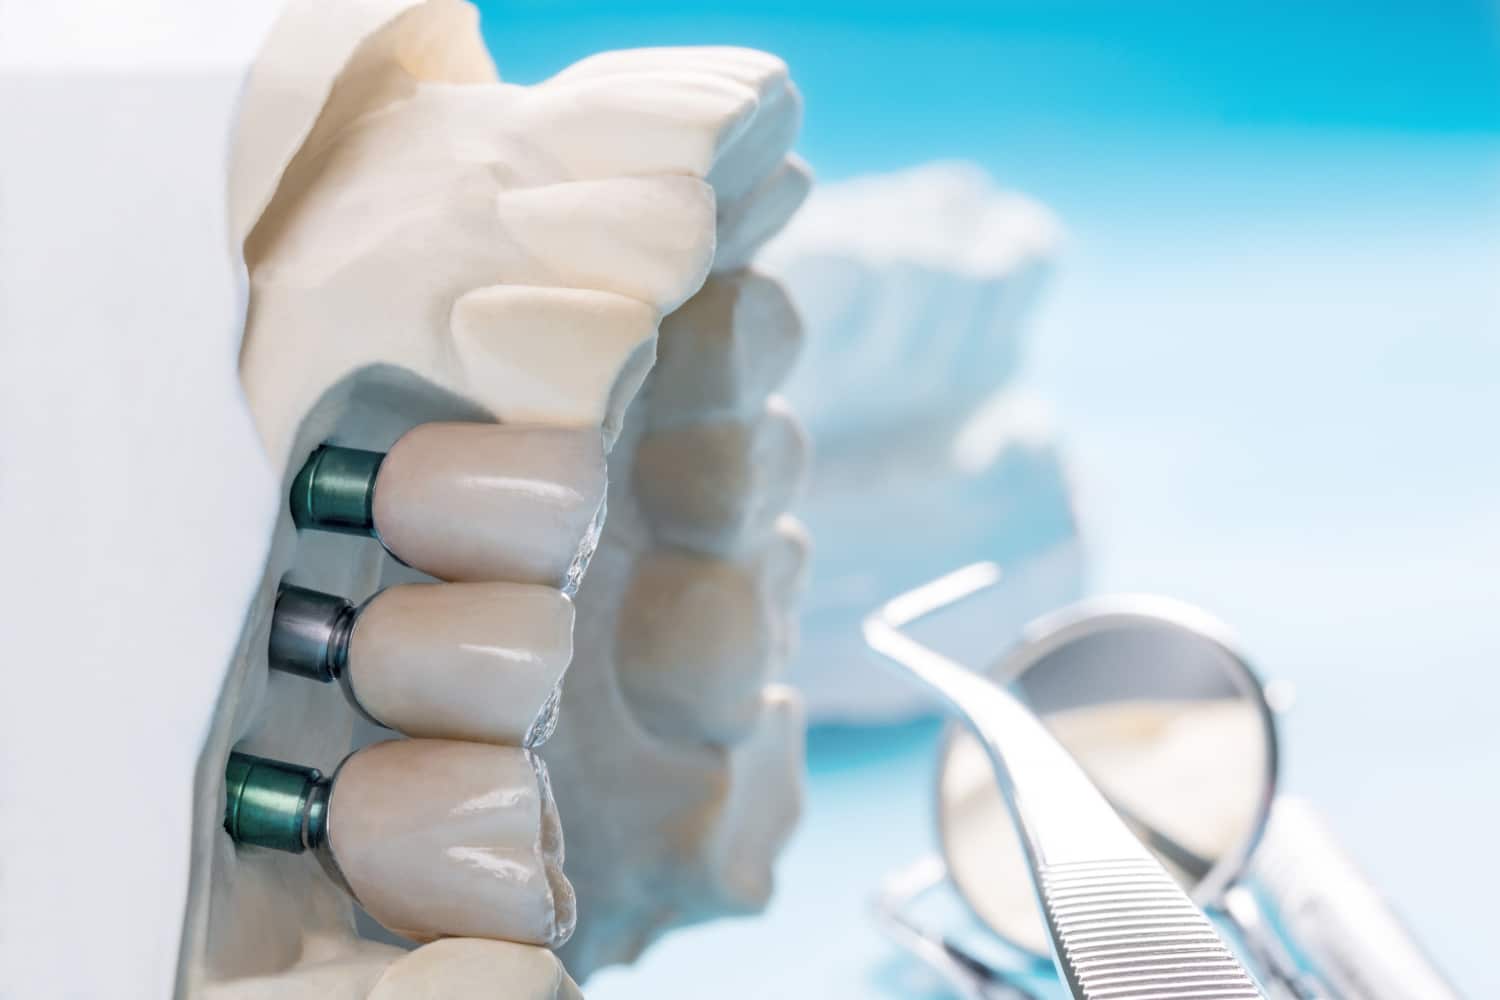 What If My Dental Insurance Doesn’t Cover Dental Implants?